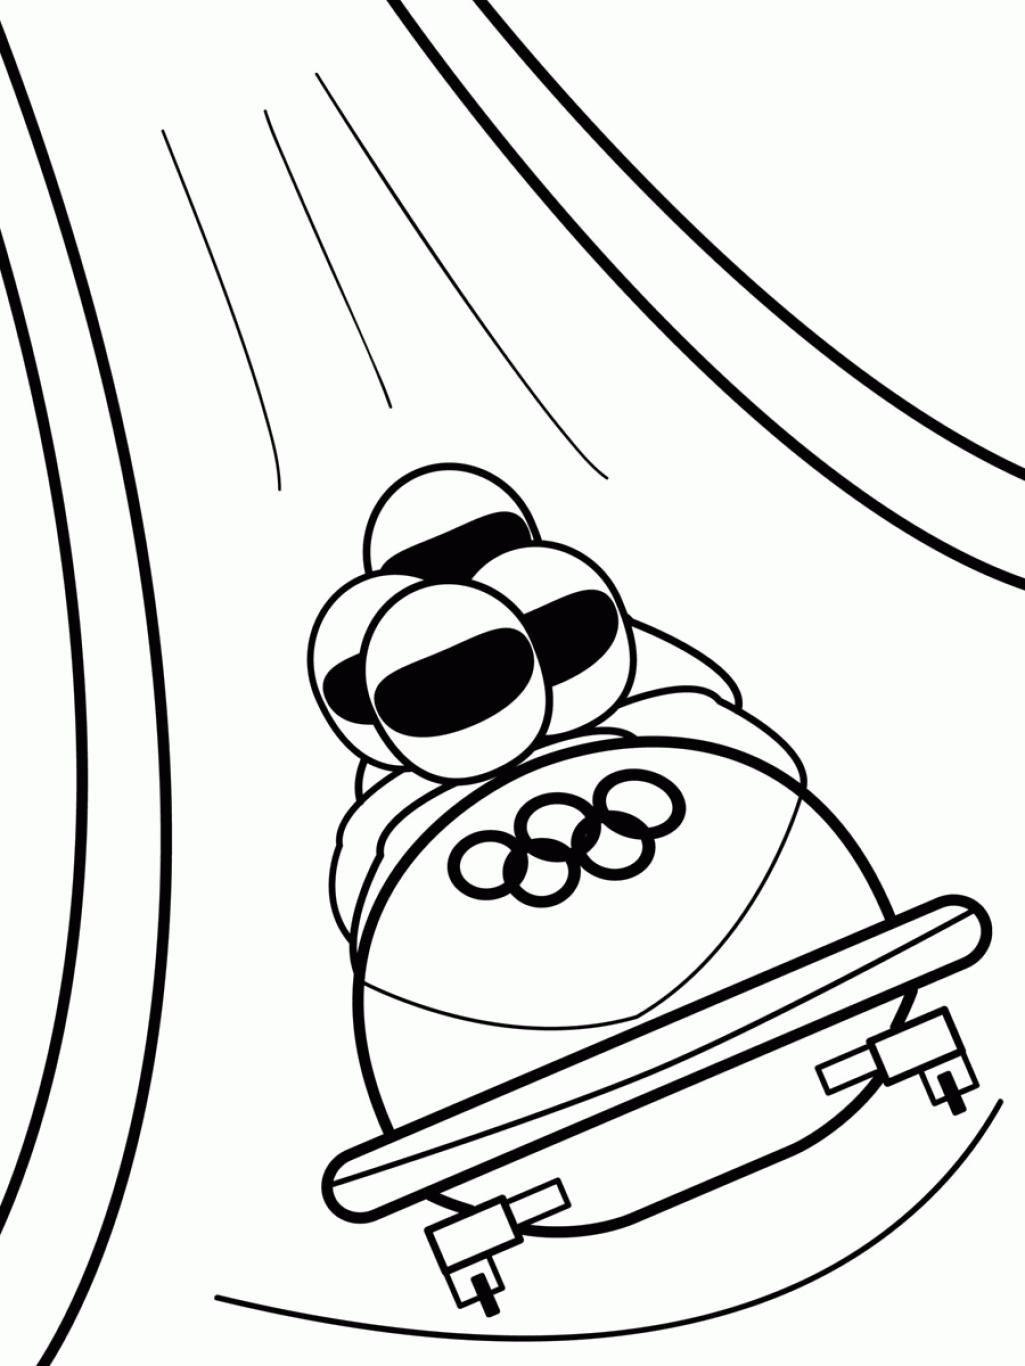 Free Winter Olympics 2016 Coloring Pages - Coloring